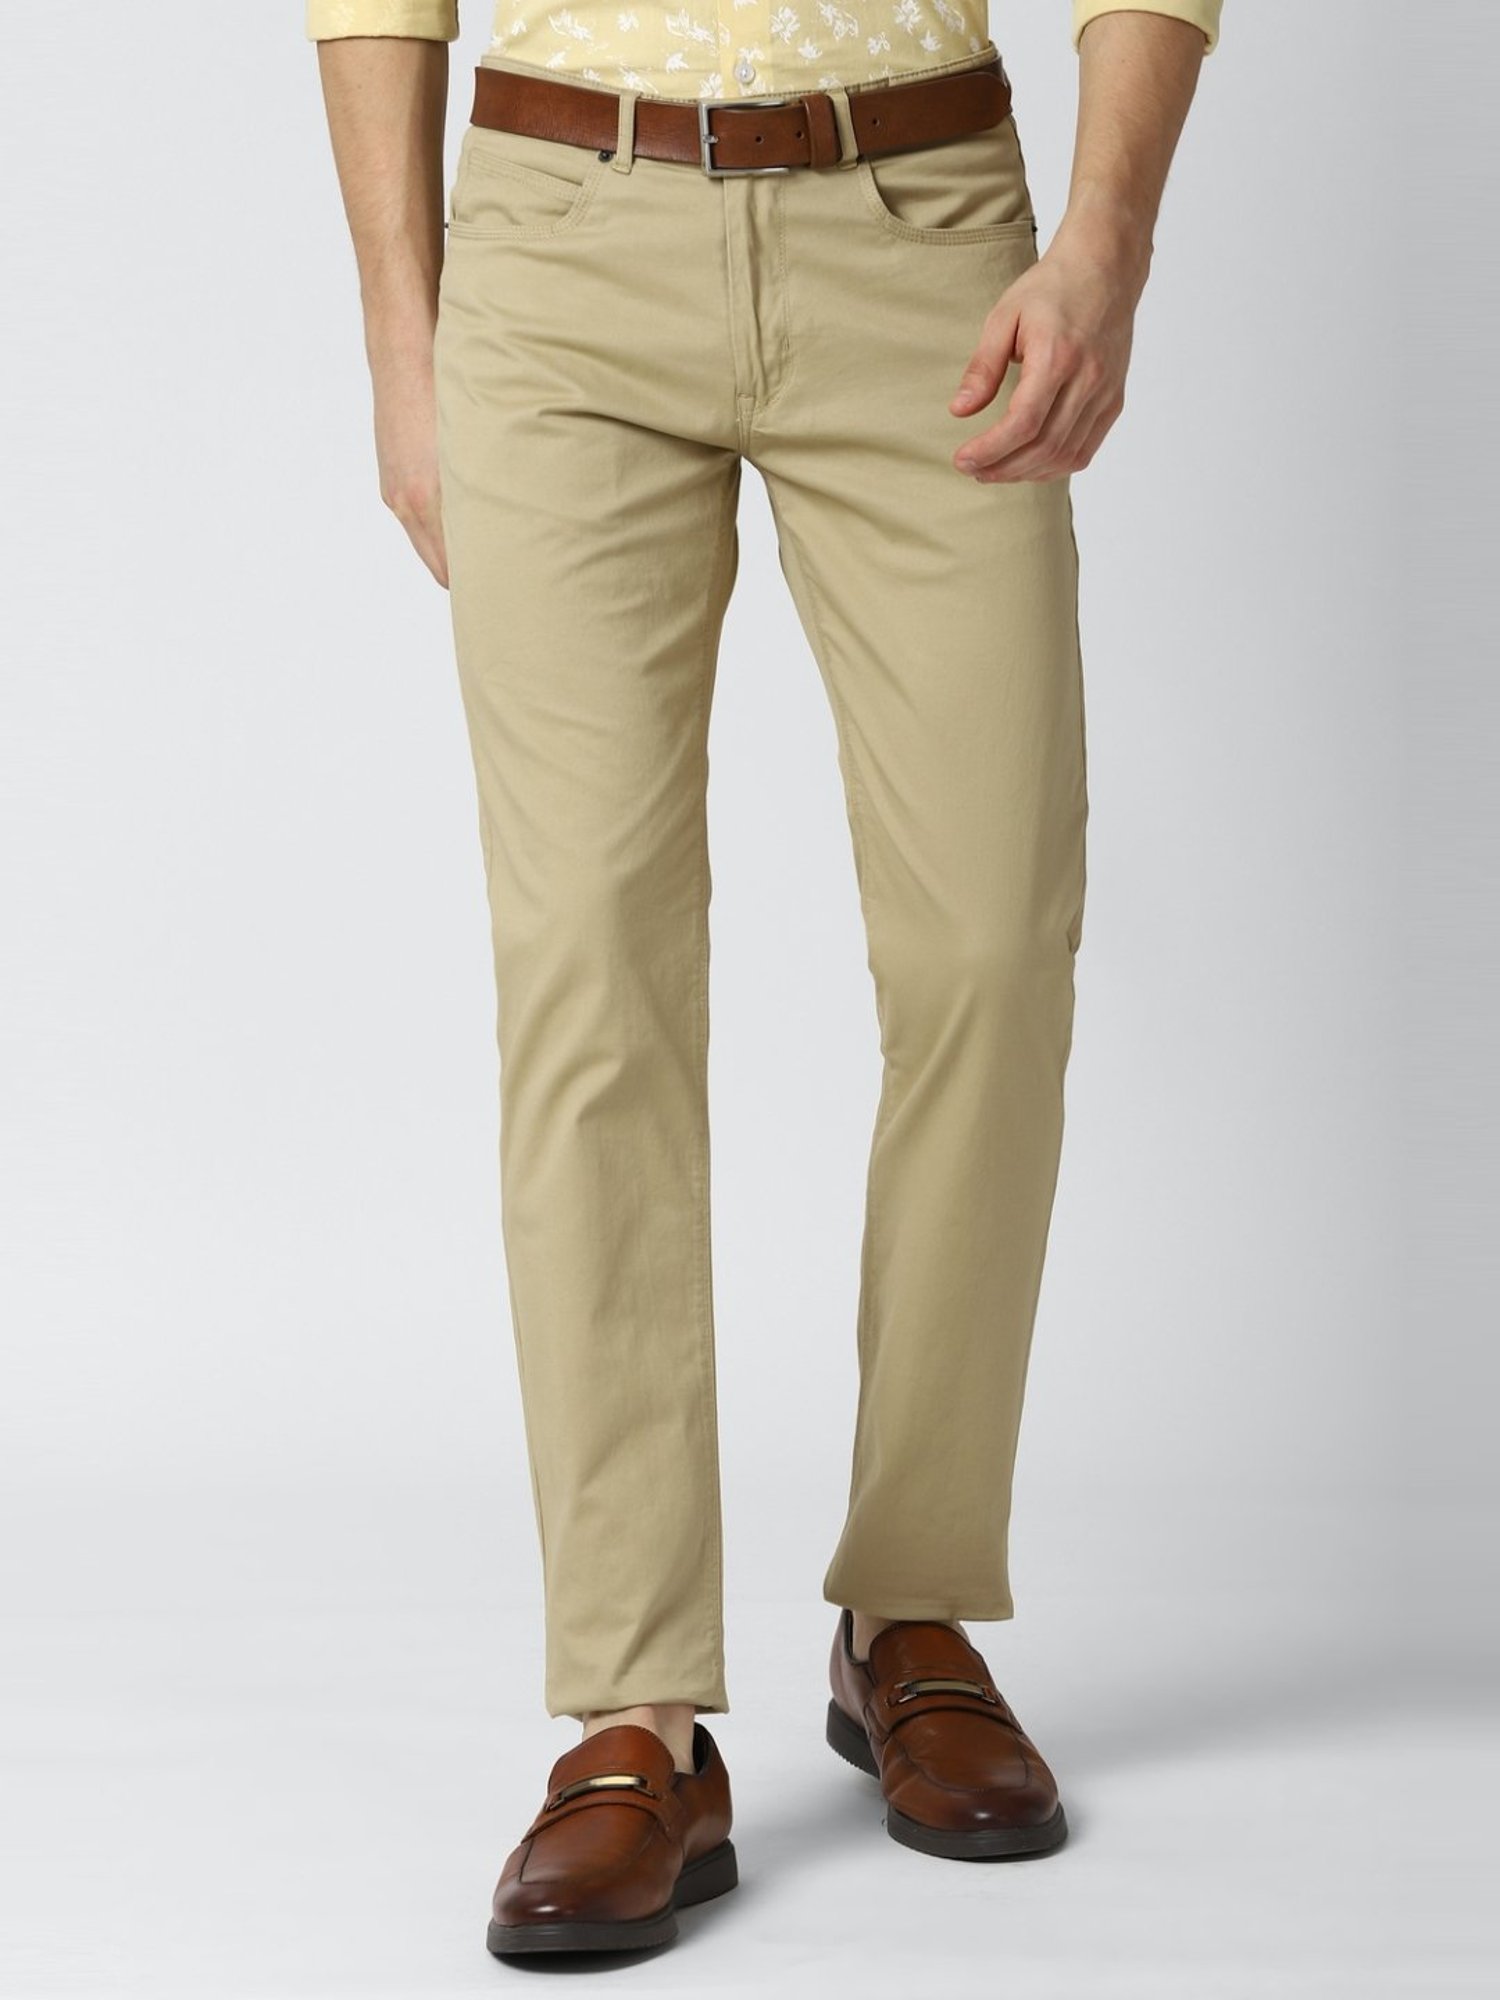 Buy Peter England Beige Cotton Slim Fit Trousers for Mens Online  Tata CLiQ